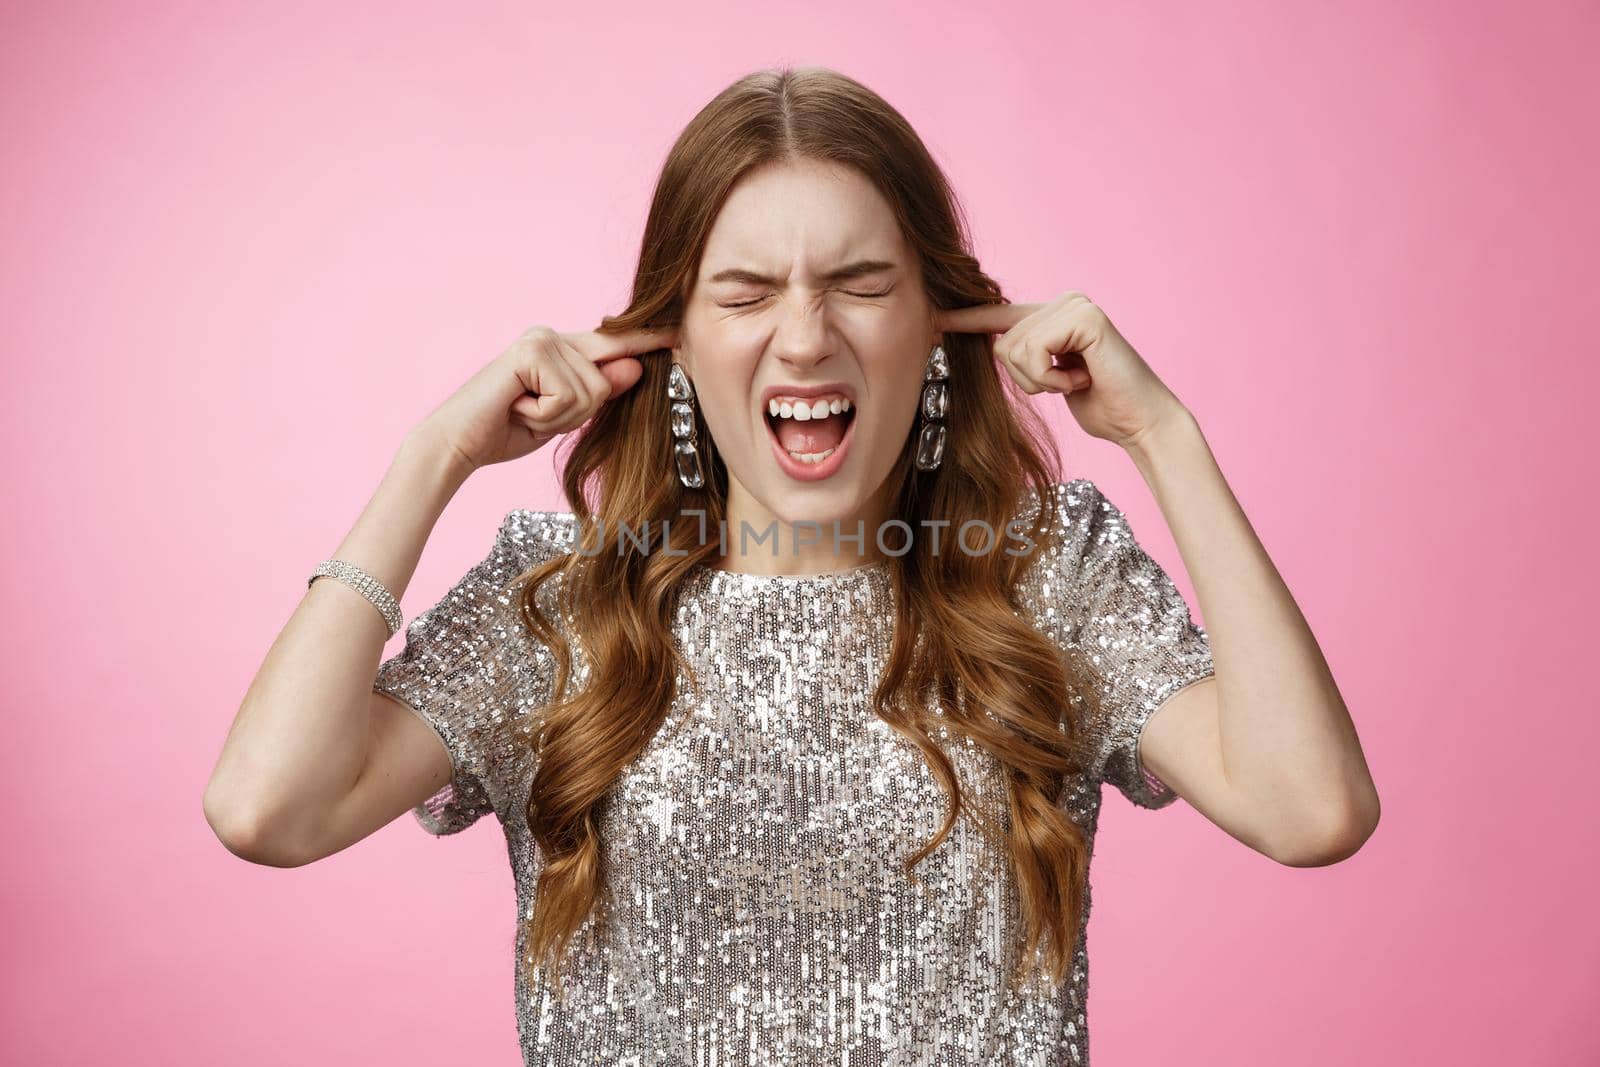 Shut up cannot stand anymore. Freaked-out glamour girl shout scream depressed loose temper close eyes yelling annoyed pissed close ears fed up hearing lies, standing pink background.